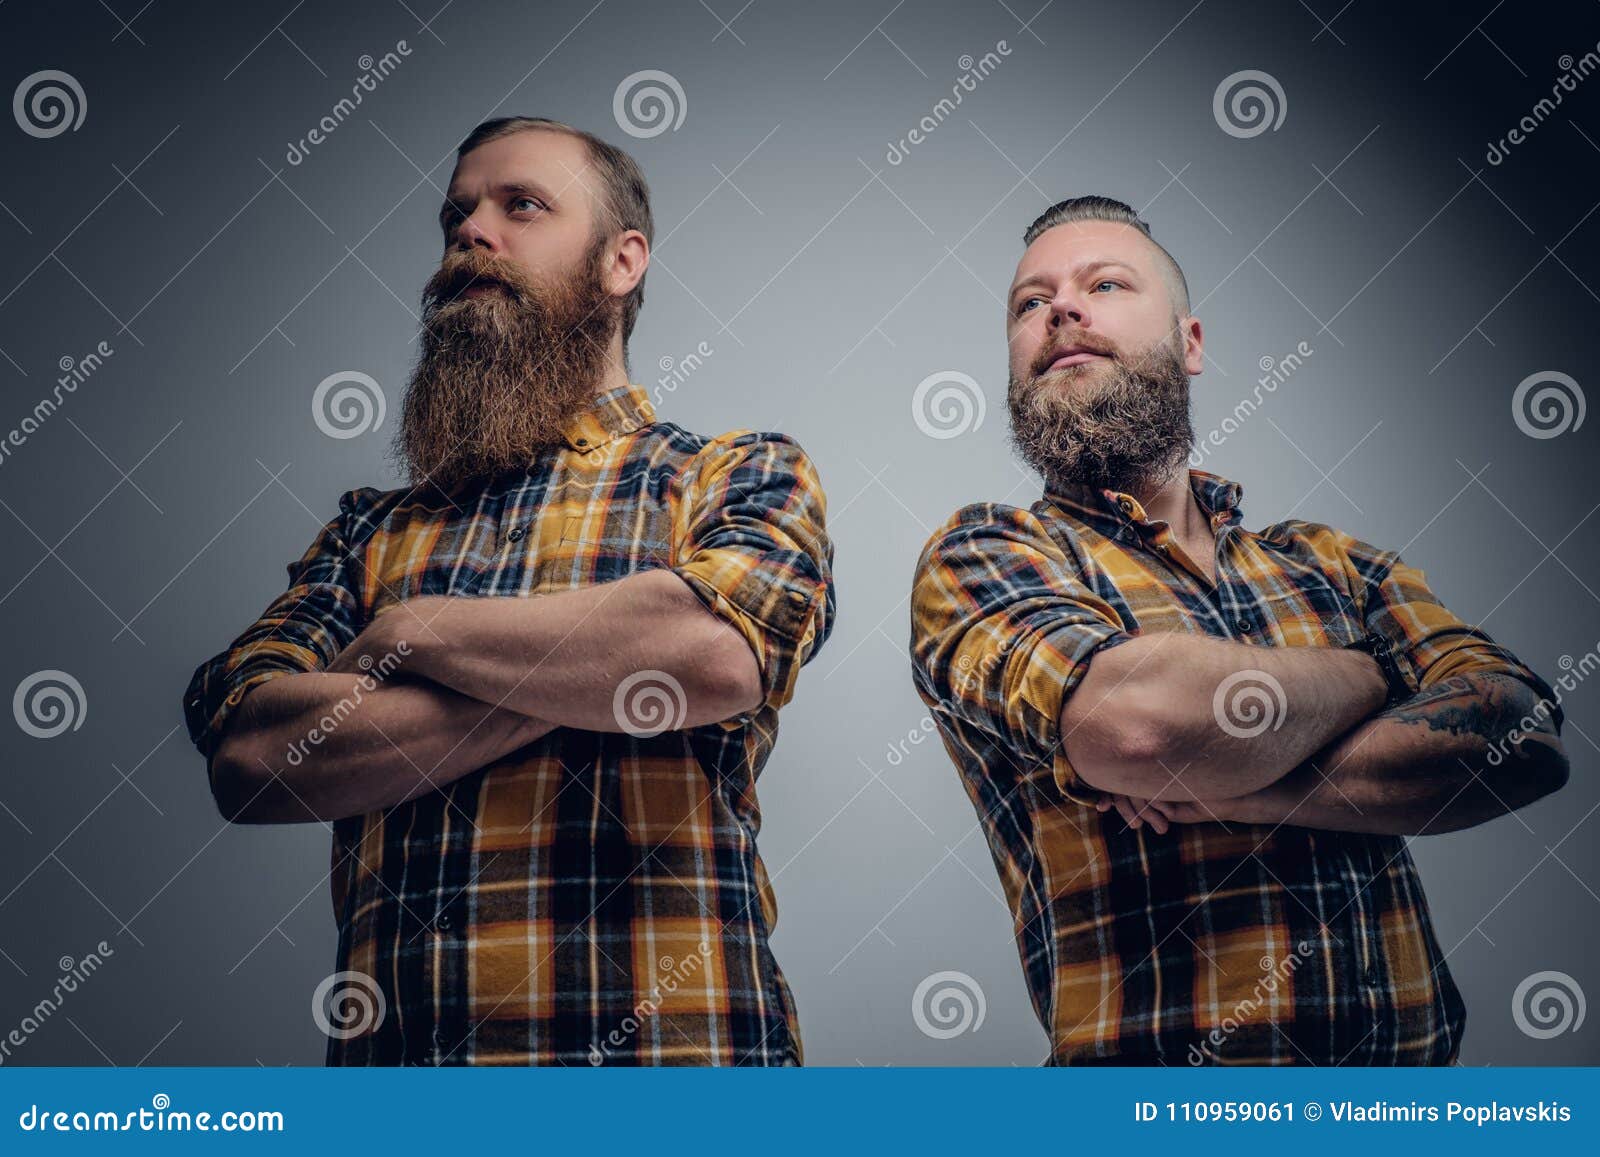 Two Bearded Men in Yellow Plaid Shirt. Stock Image - Image of casual ...